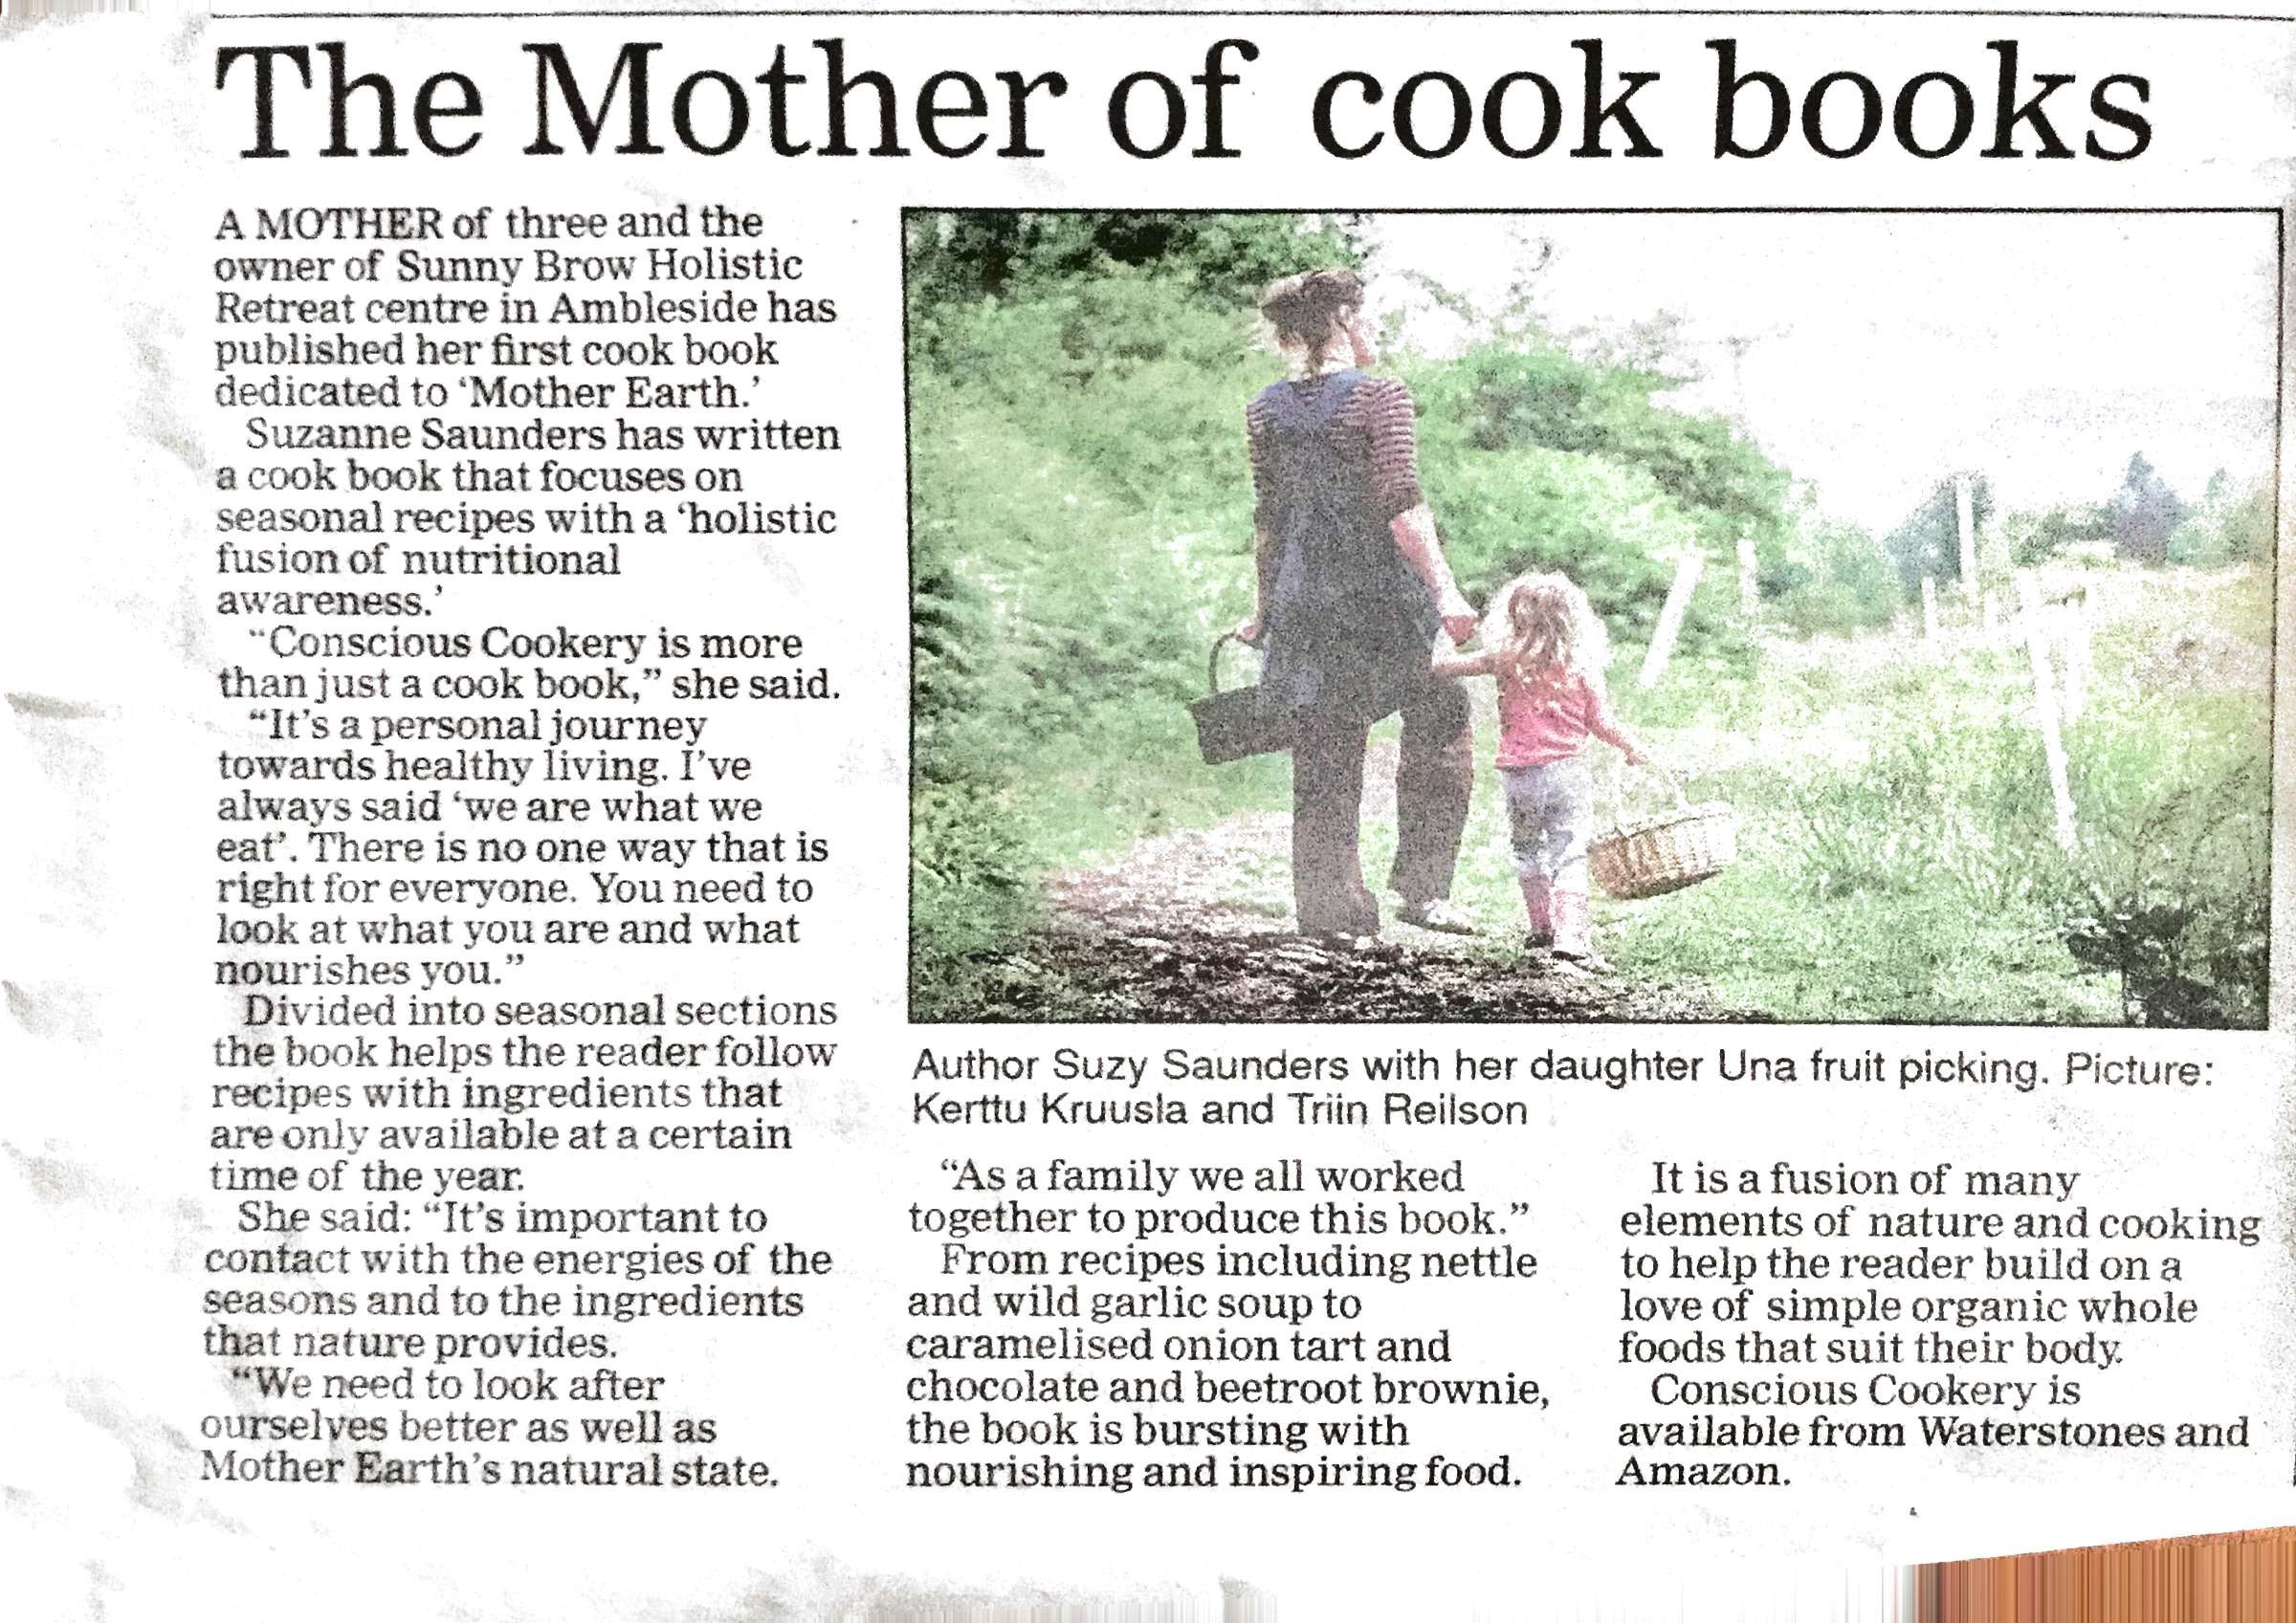 Westmorland Gazette Featured Suzanne Saunders, the Author of Conscious Cookery